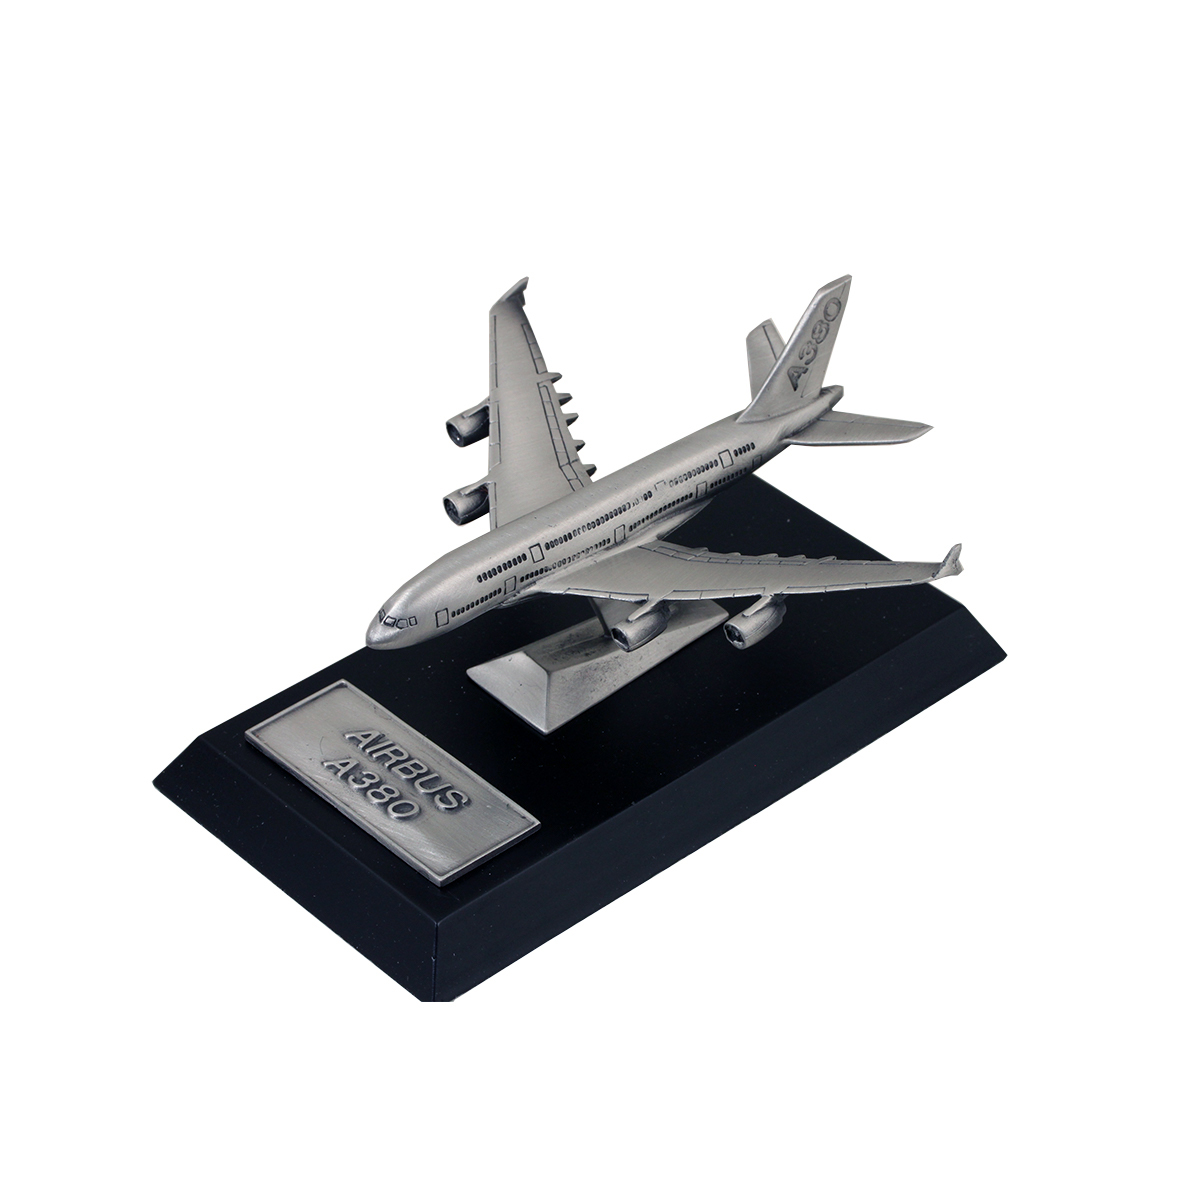 Airbus A380 Desk Model - Pewter